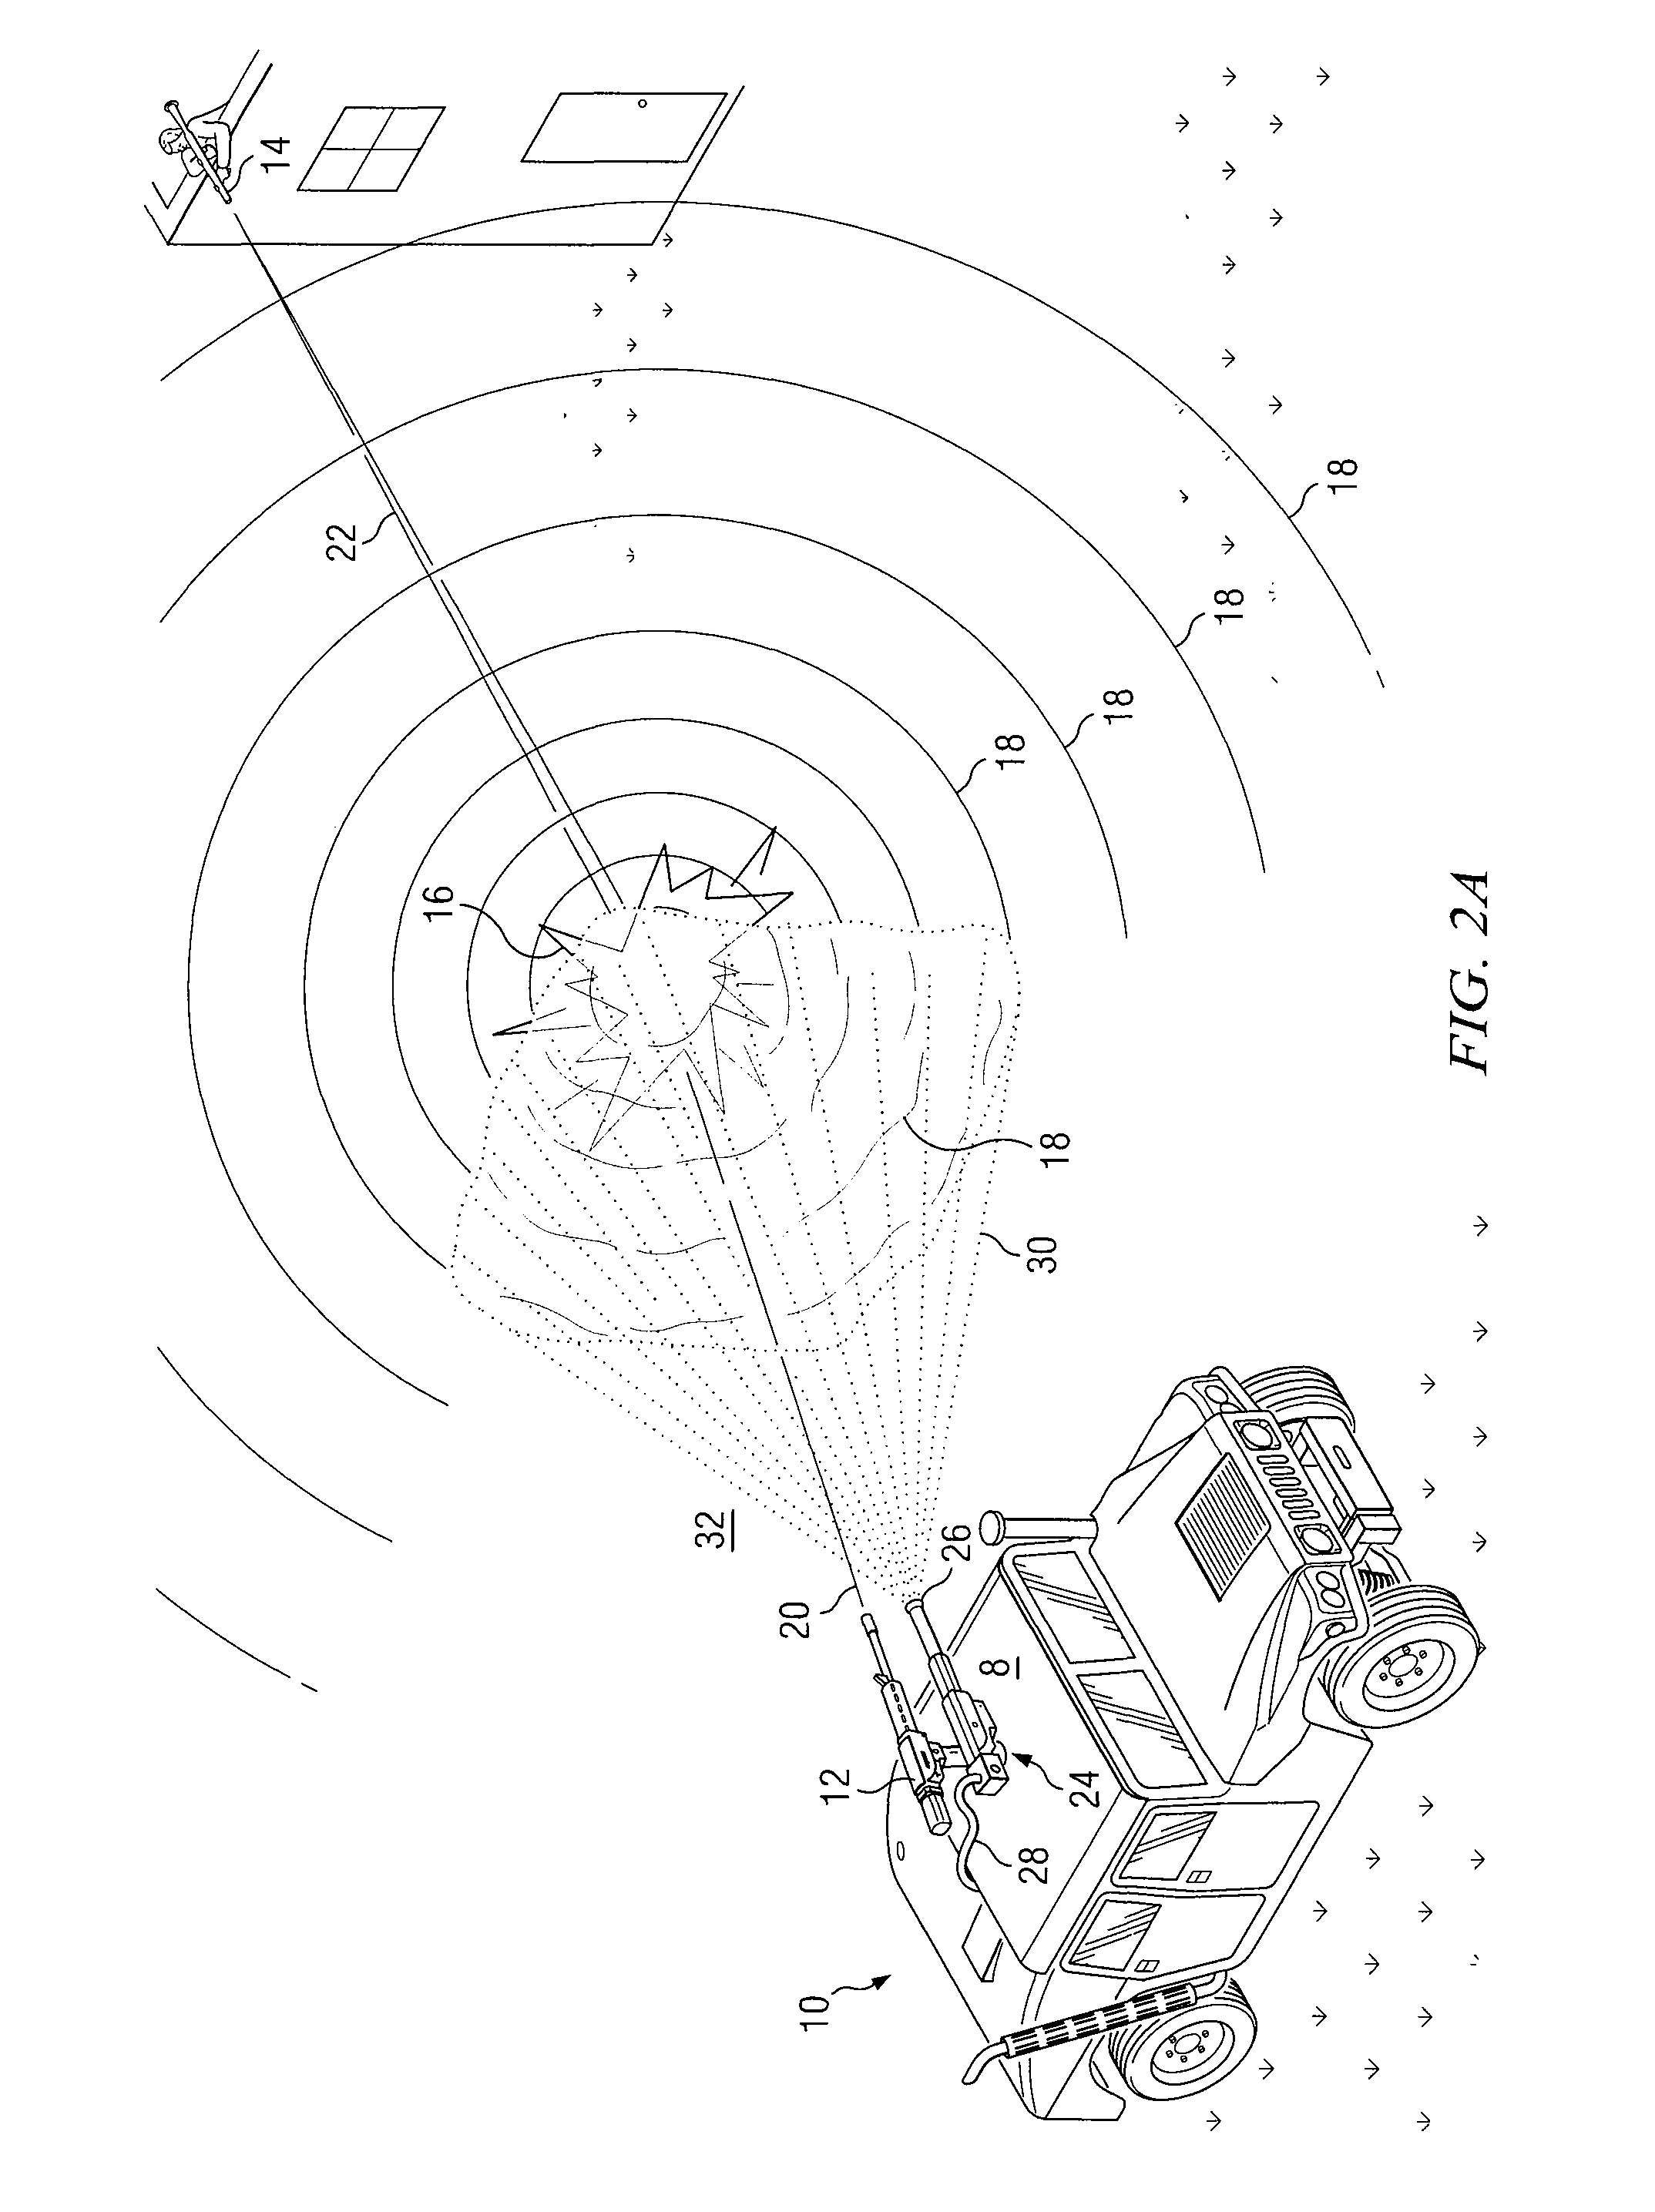 Systems and methods for mitigating a blast wave